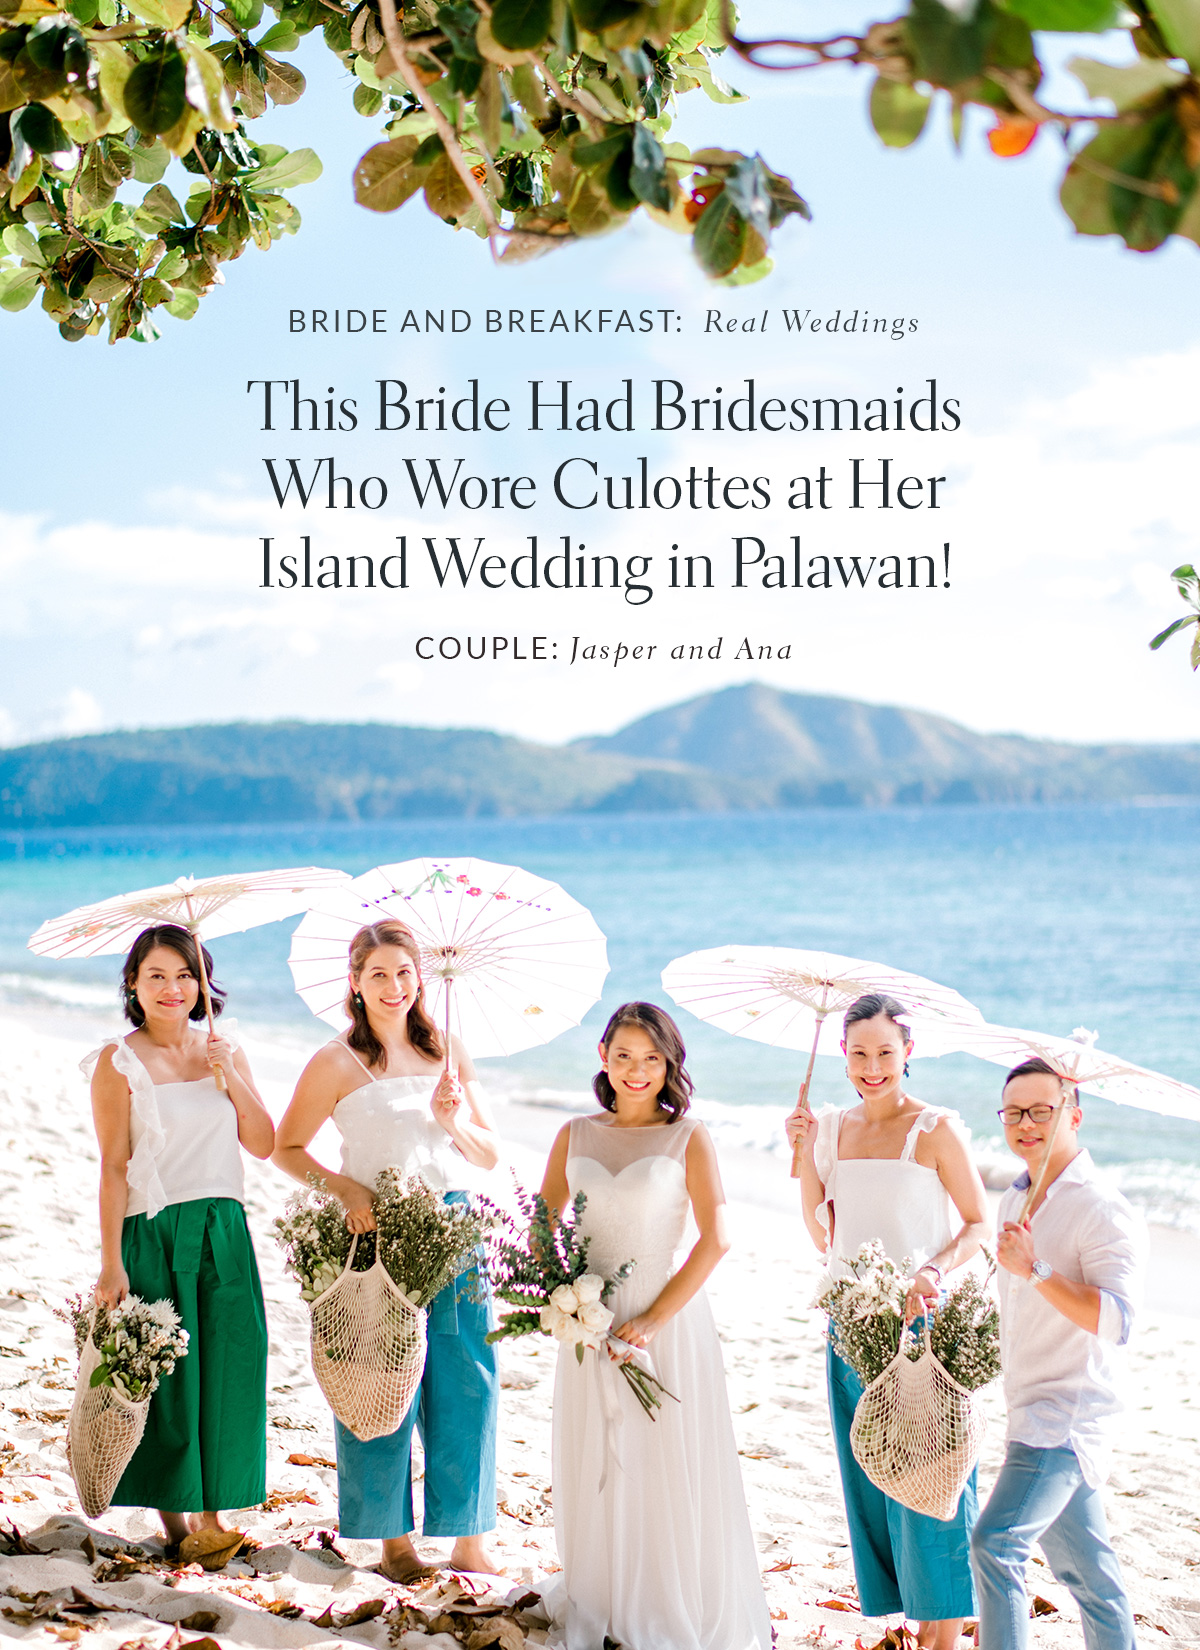 This Bride Had Bridesmaids Who Wore Culottes at Her Island Wedding in Palawan!